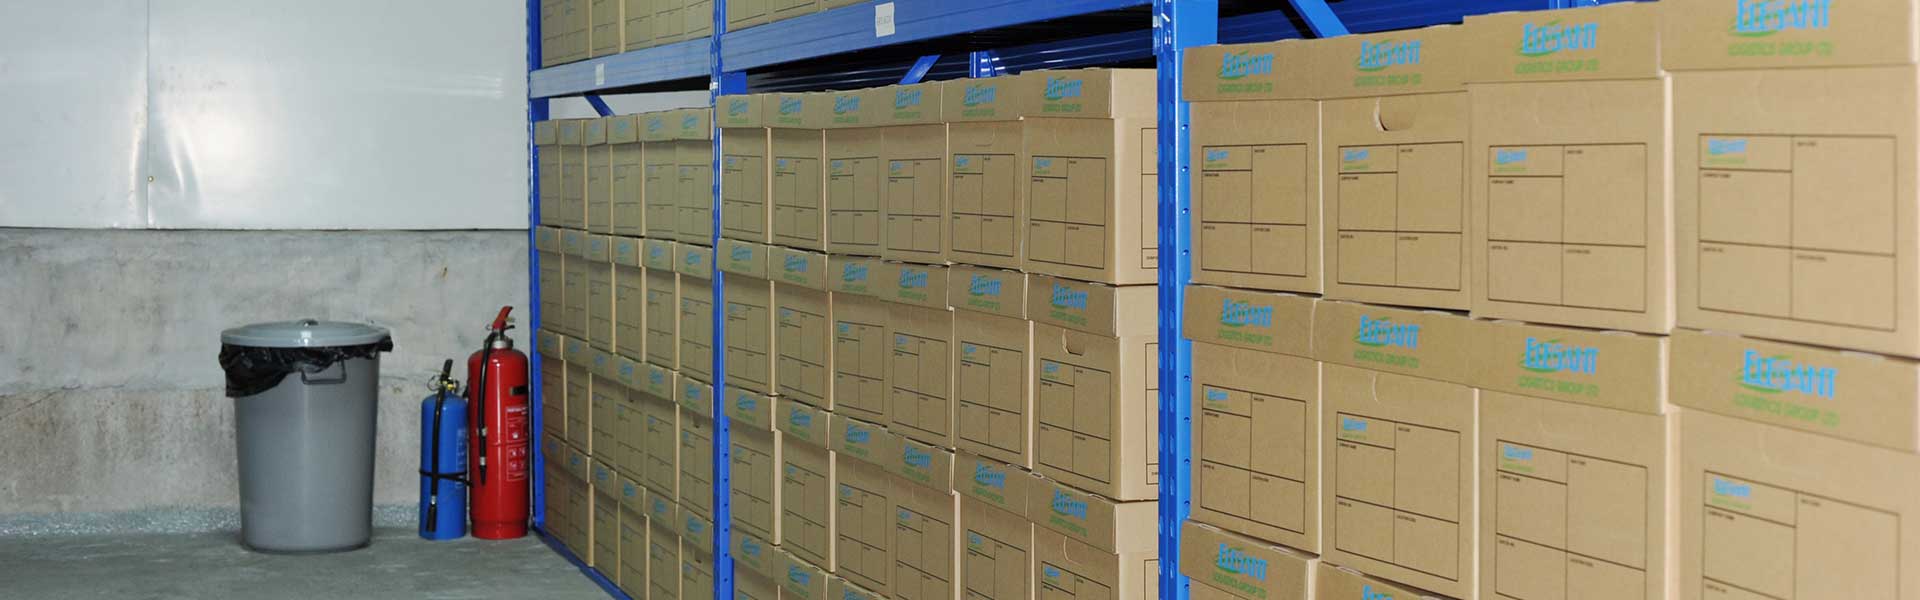 ELEGANT Logistics provides professional document storage and managed delivery services